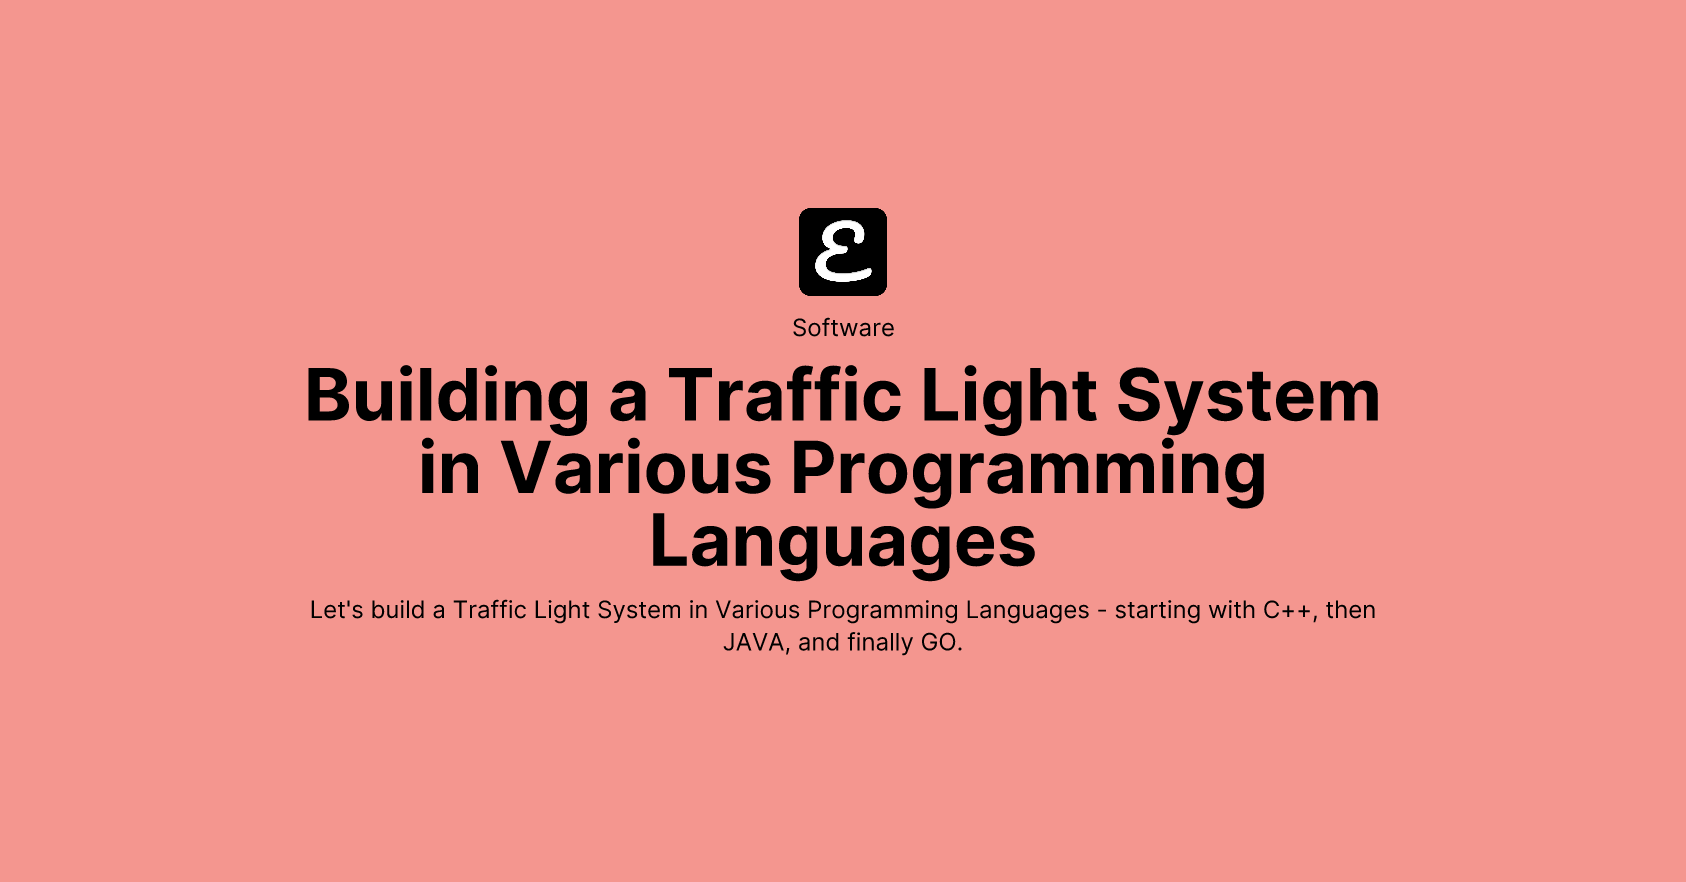 Building a Traffic Light System in Various Programming Languages by Eric David Smith